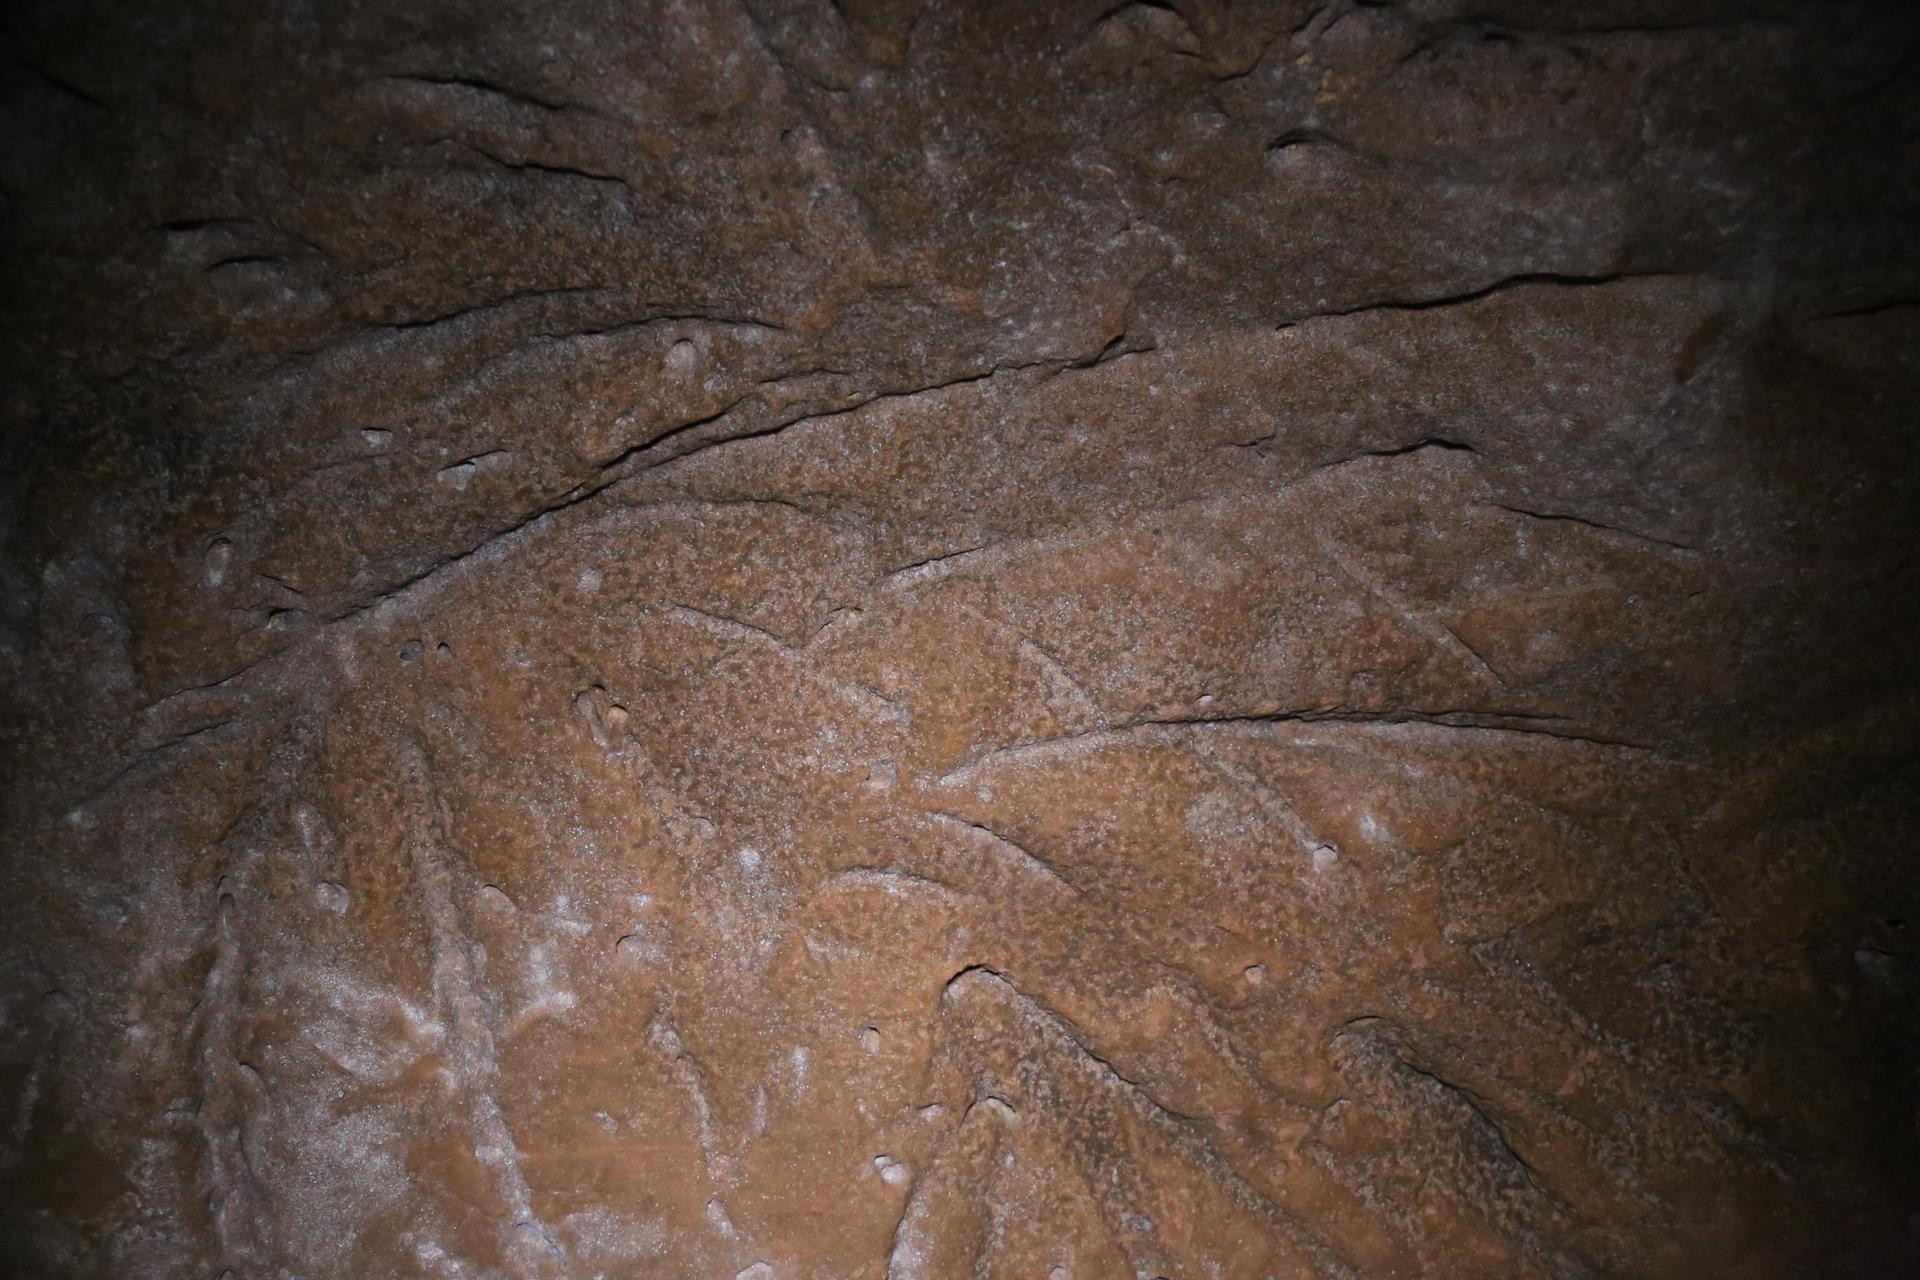 The defining feature of many paleoburrows found in southern Brazil: claw marks made by the giant ground sloth.